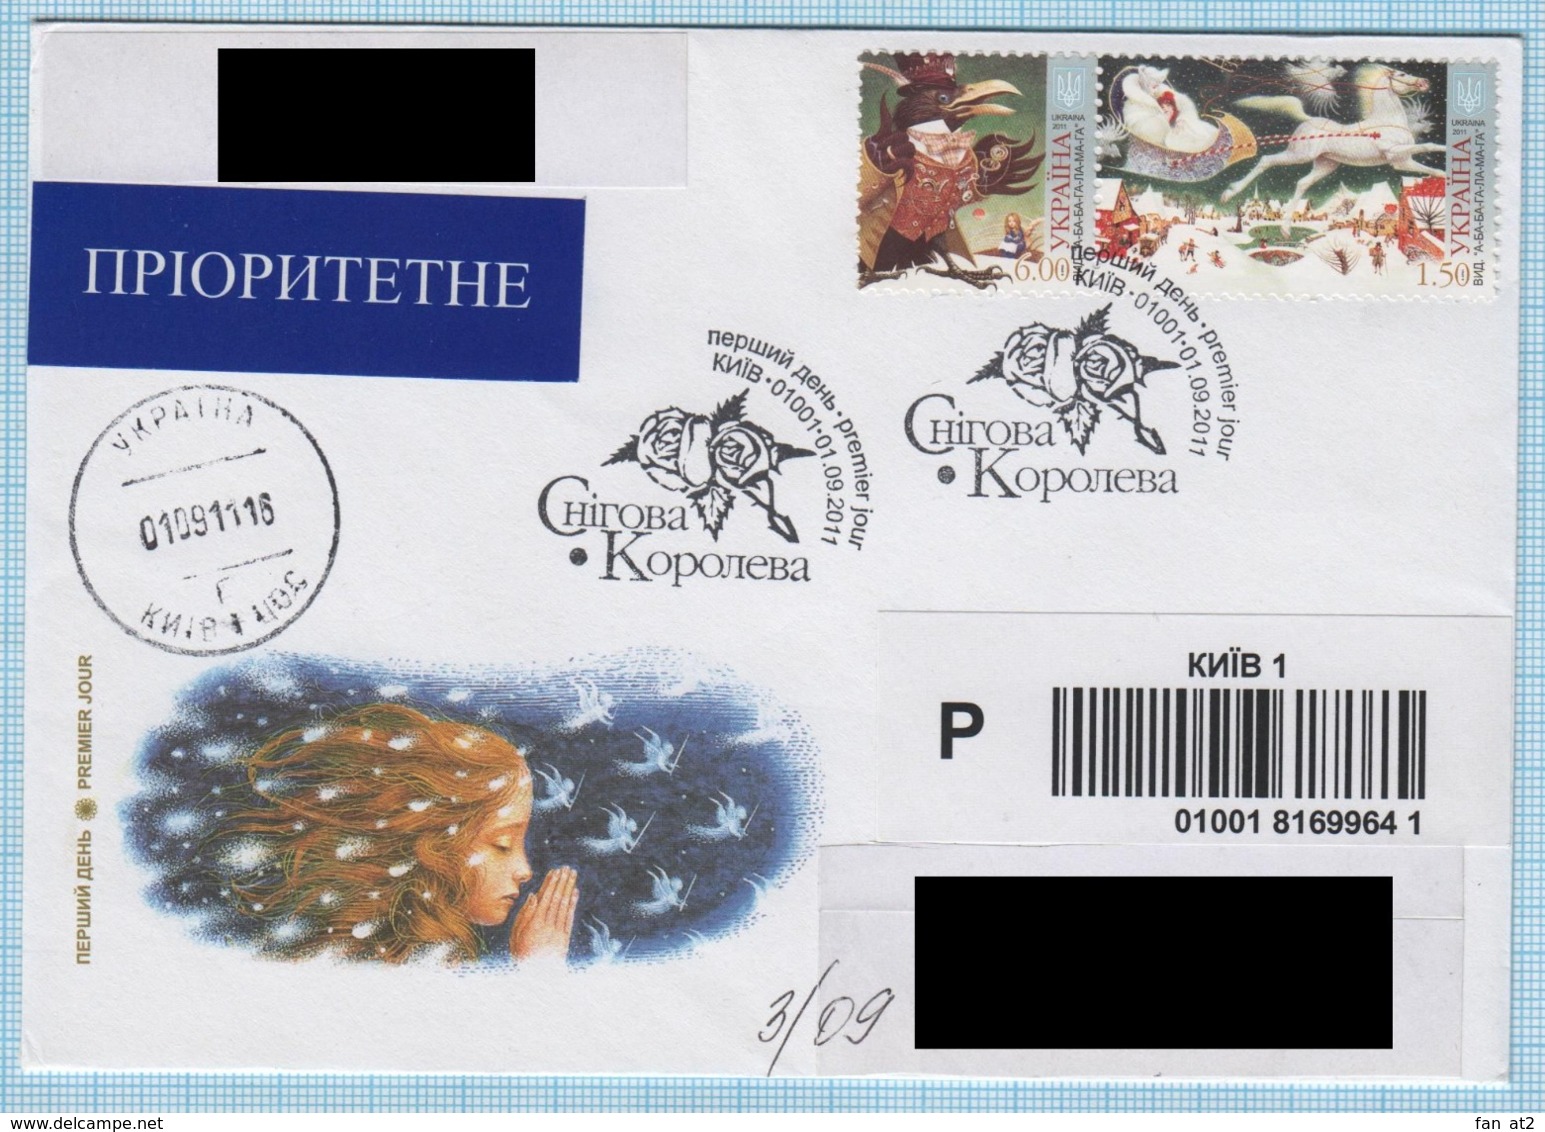 UKRAINE / FDC / The Tale Of Hans Christian Andersen Snow Queen Circulated Registered Letter From Kyiv To Odessa 2011 - Ukraine